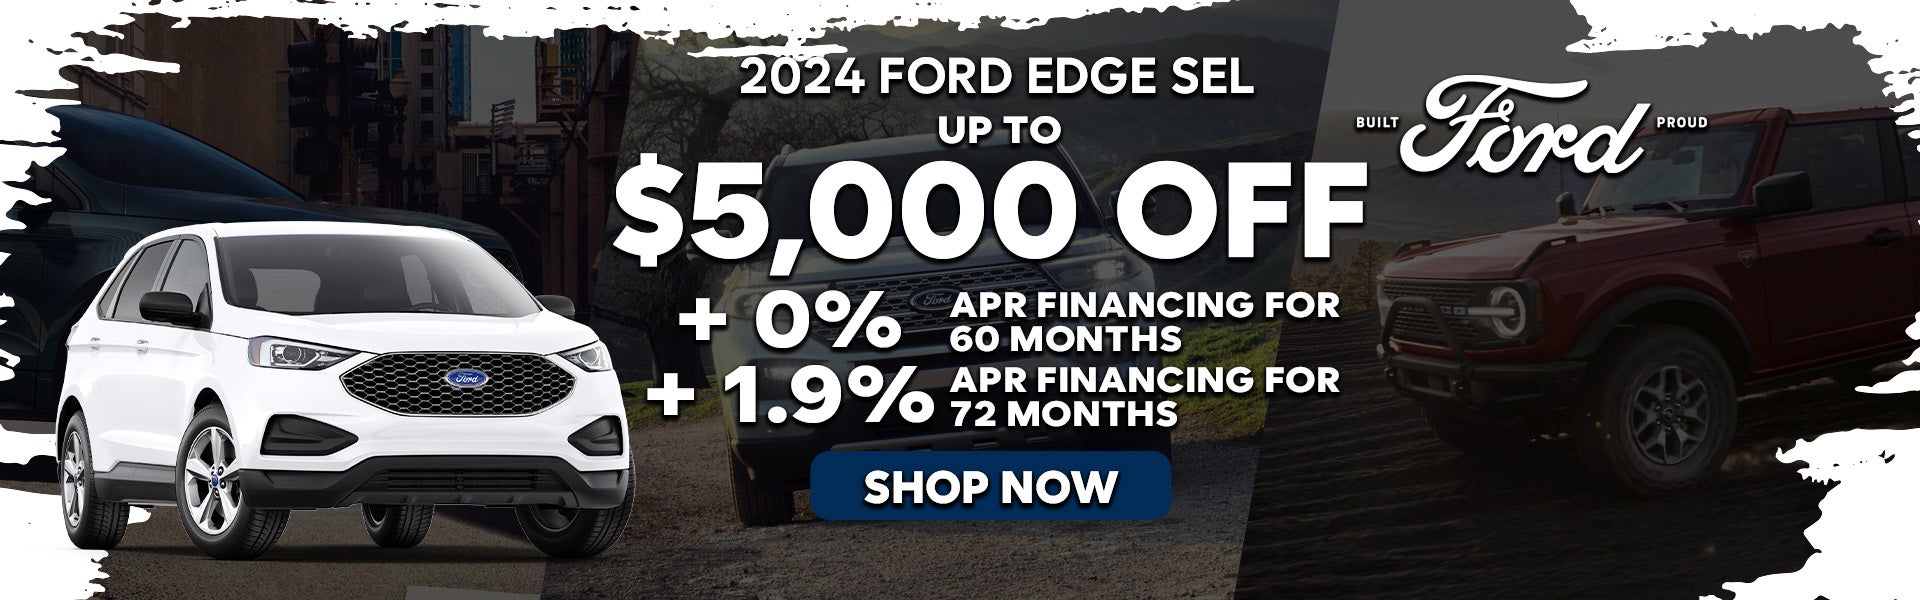 2024 Ford Edge SEL Special Offer